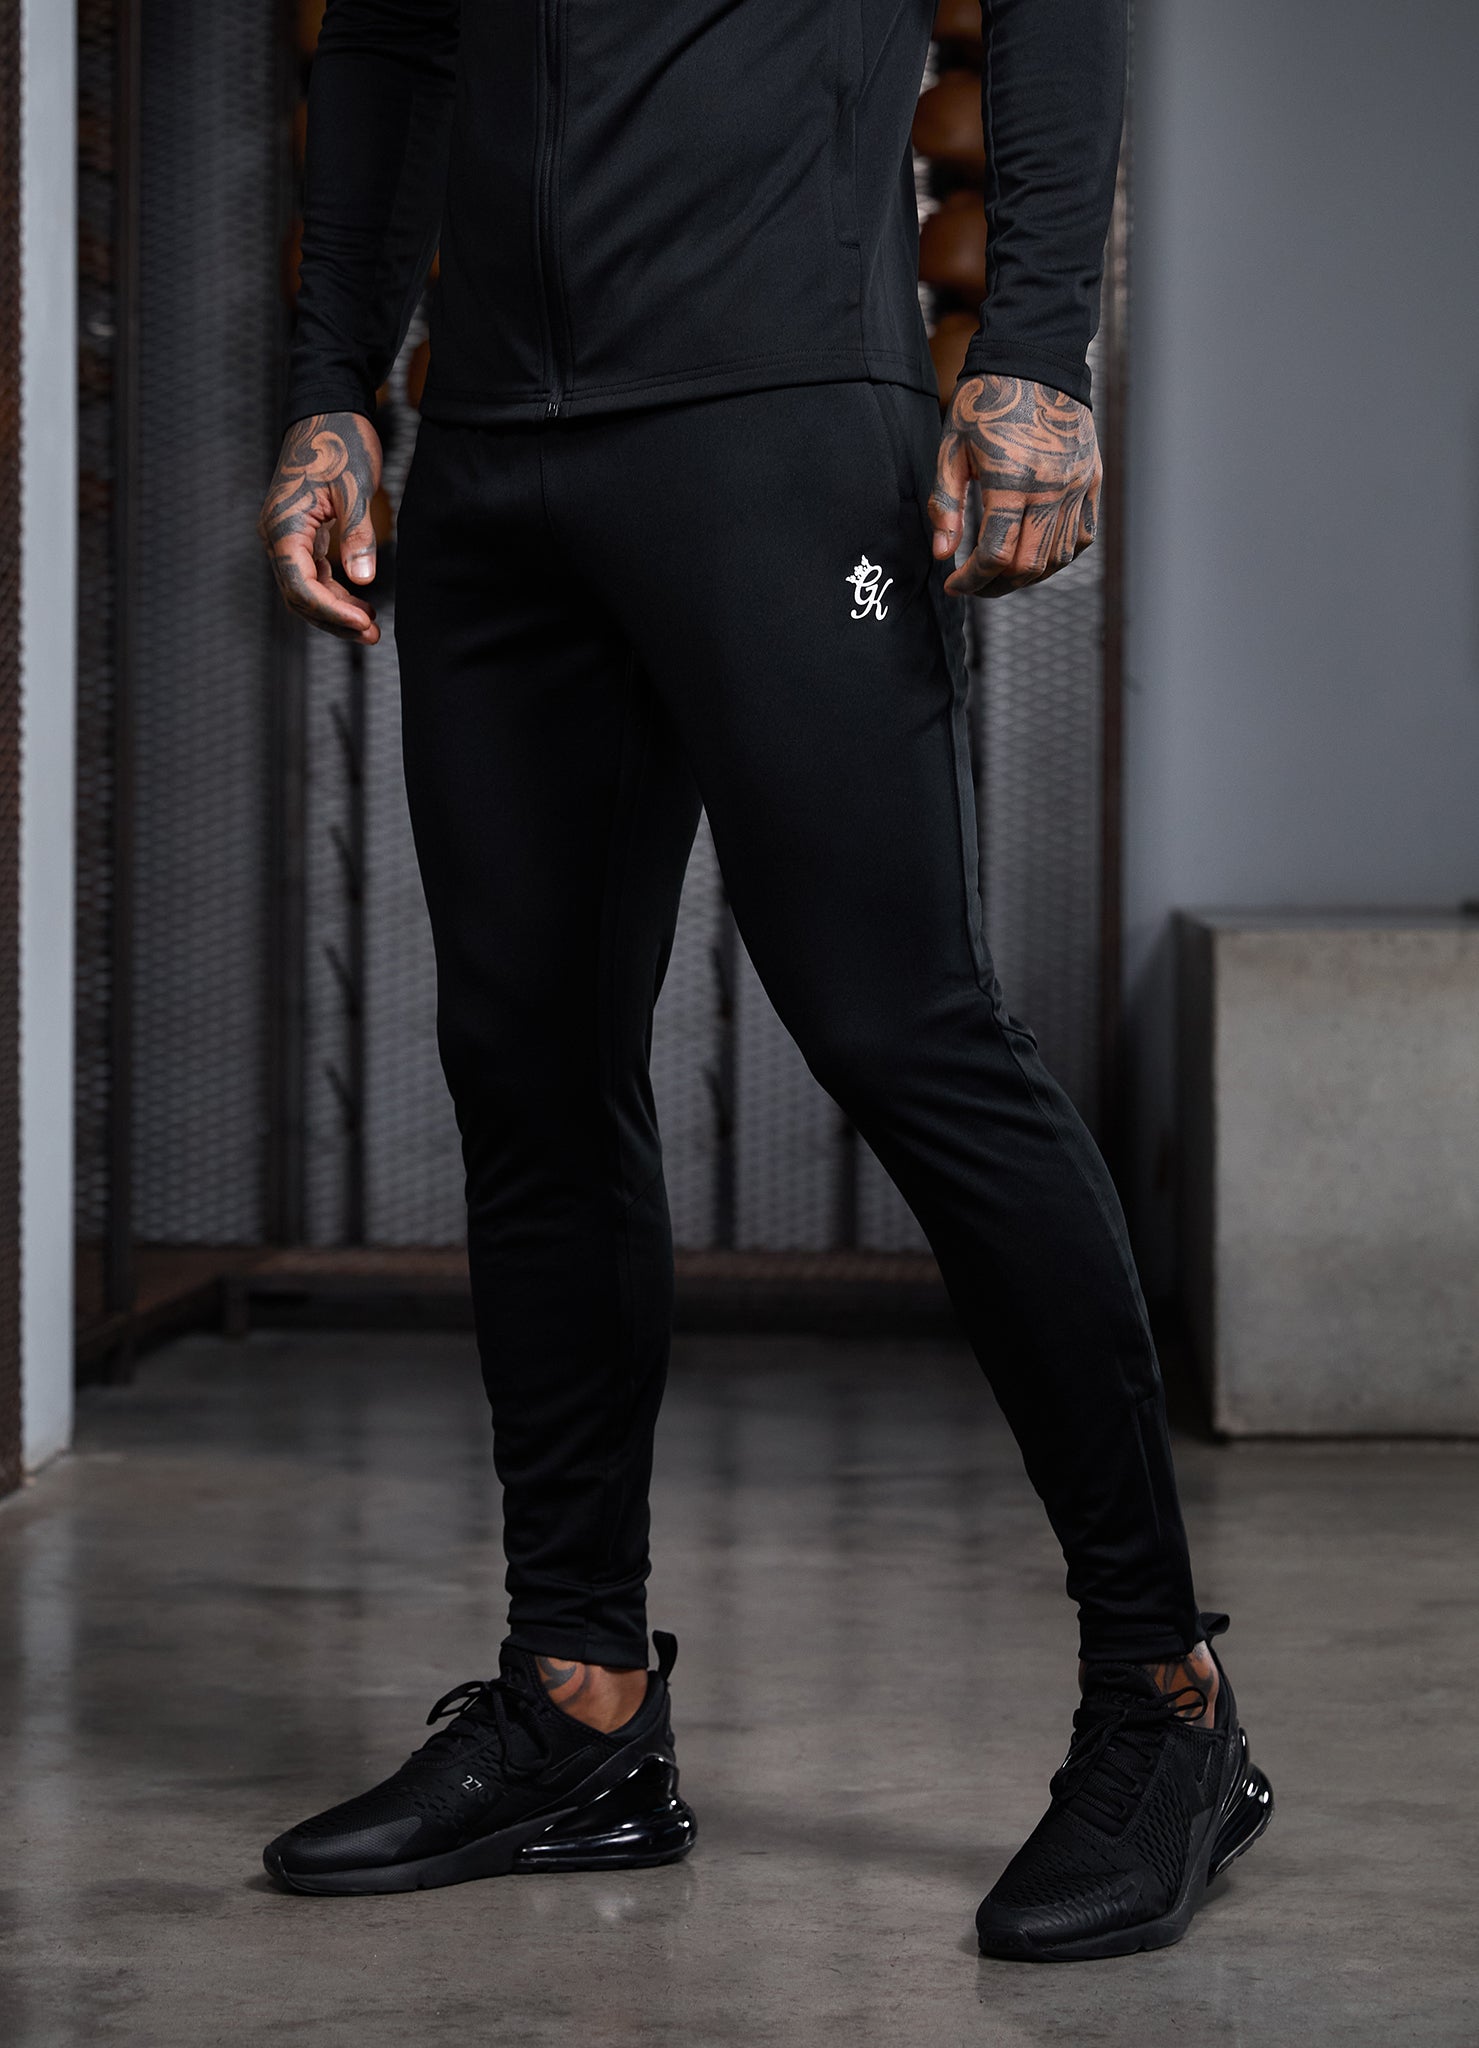 King Slim Fit Trousers